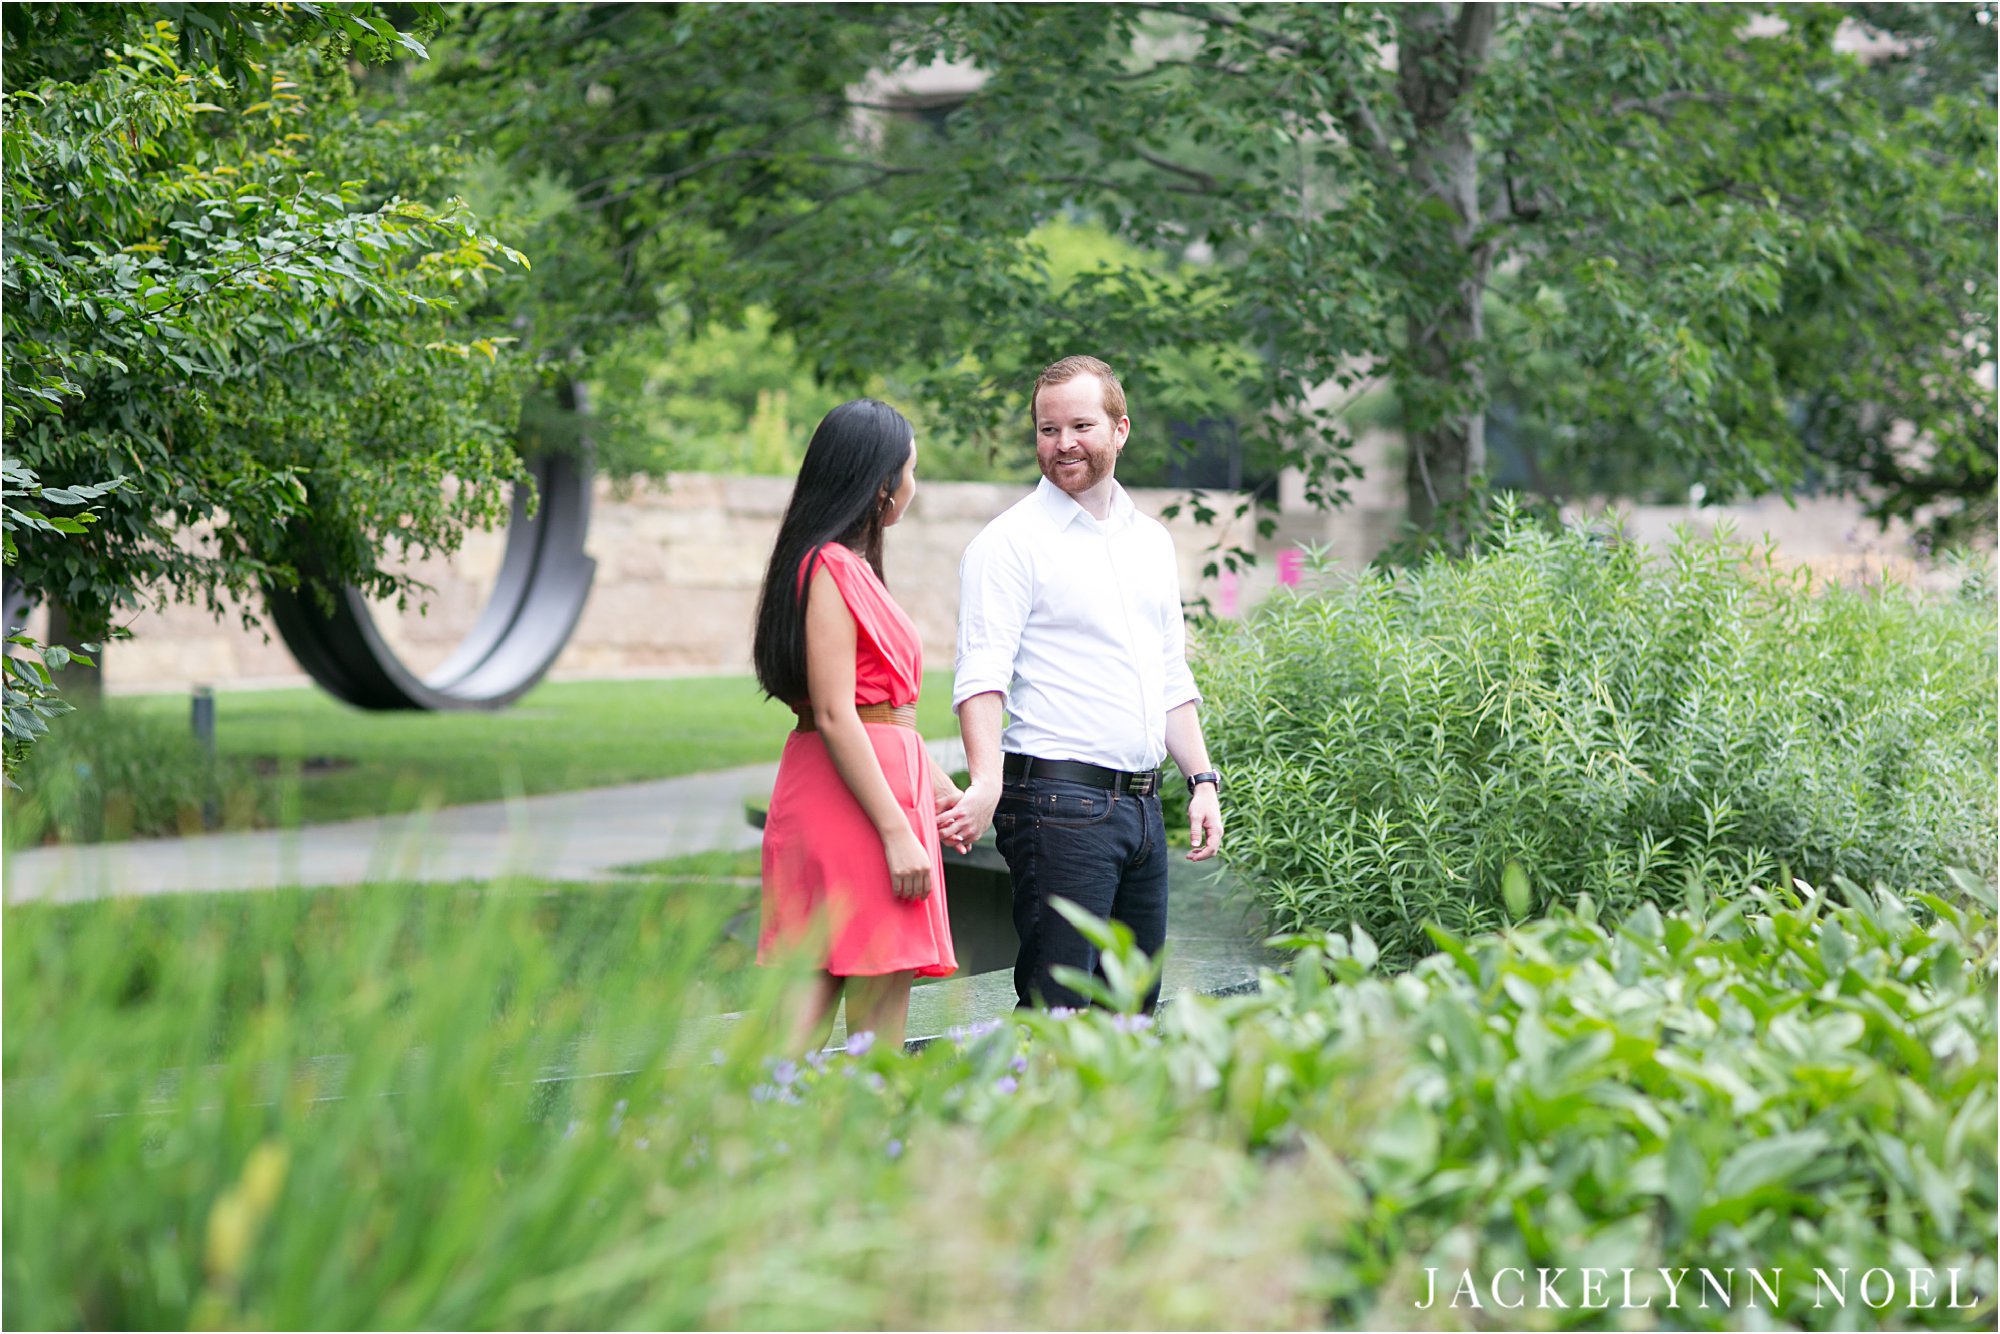 Alex and Cristina Engaged at the Old Courthouse, Kiener Plaza, and City Garden by Jackelynn Noel photography